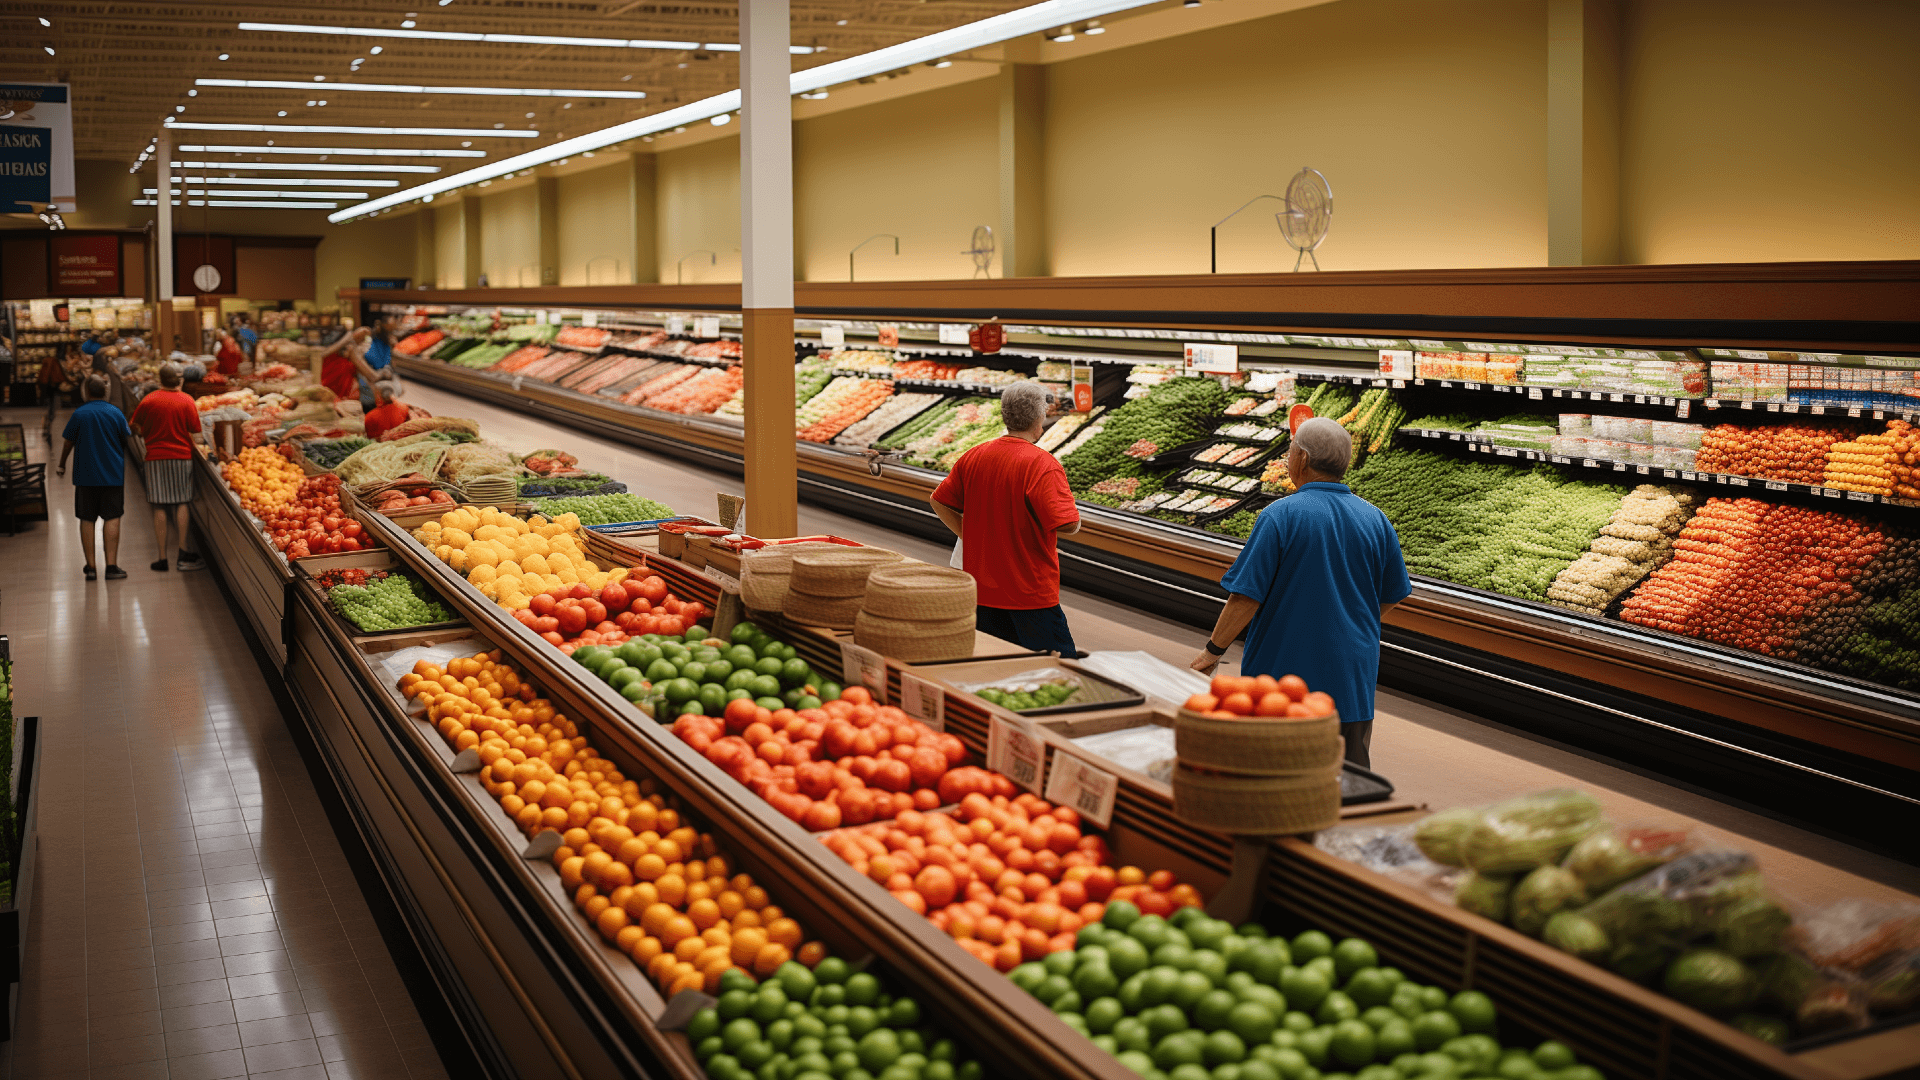 data science is helping grocery store supply chains stay stocked for shoppers in store